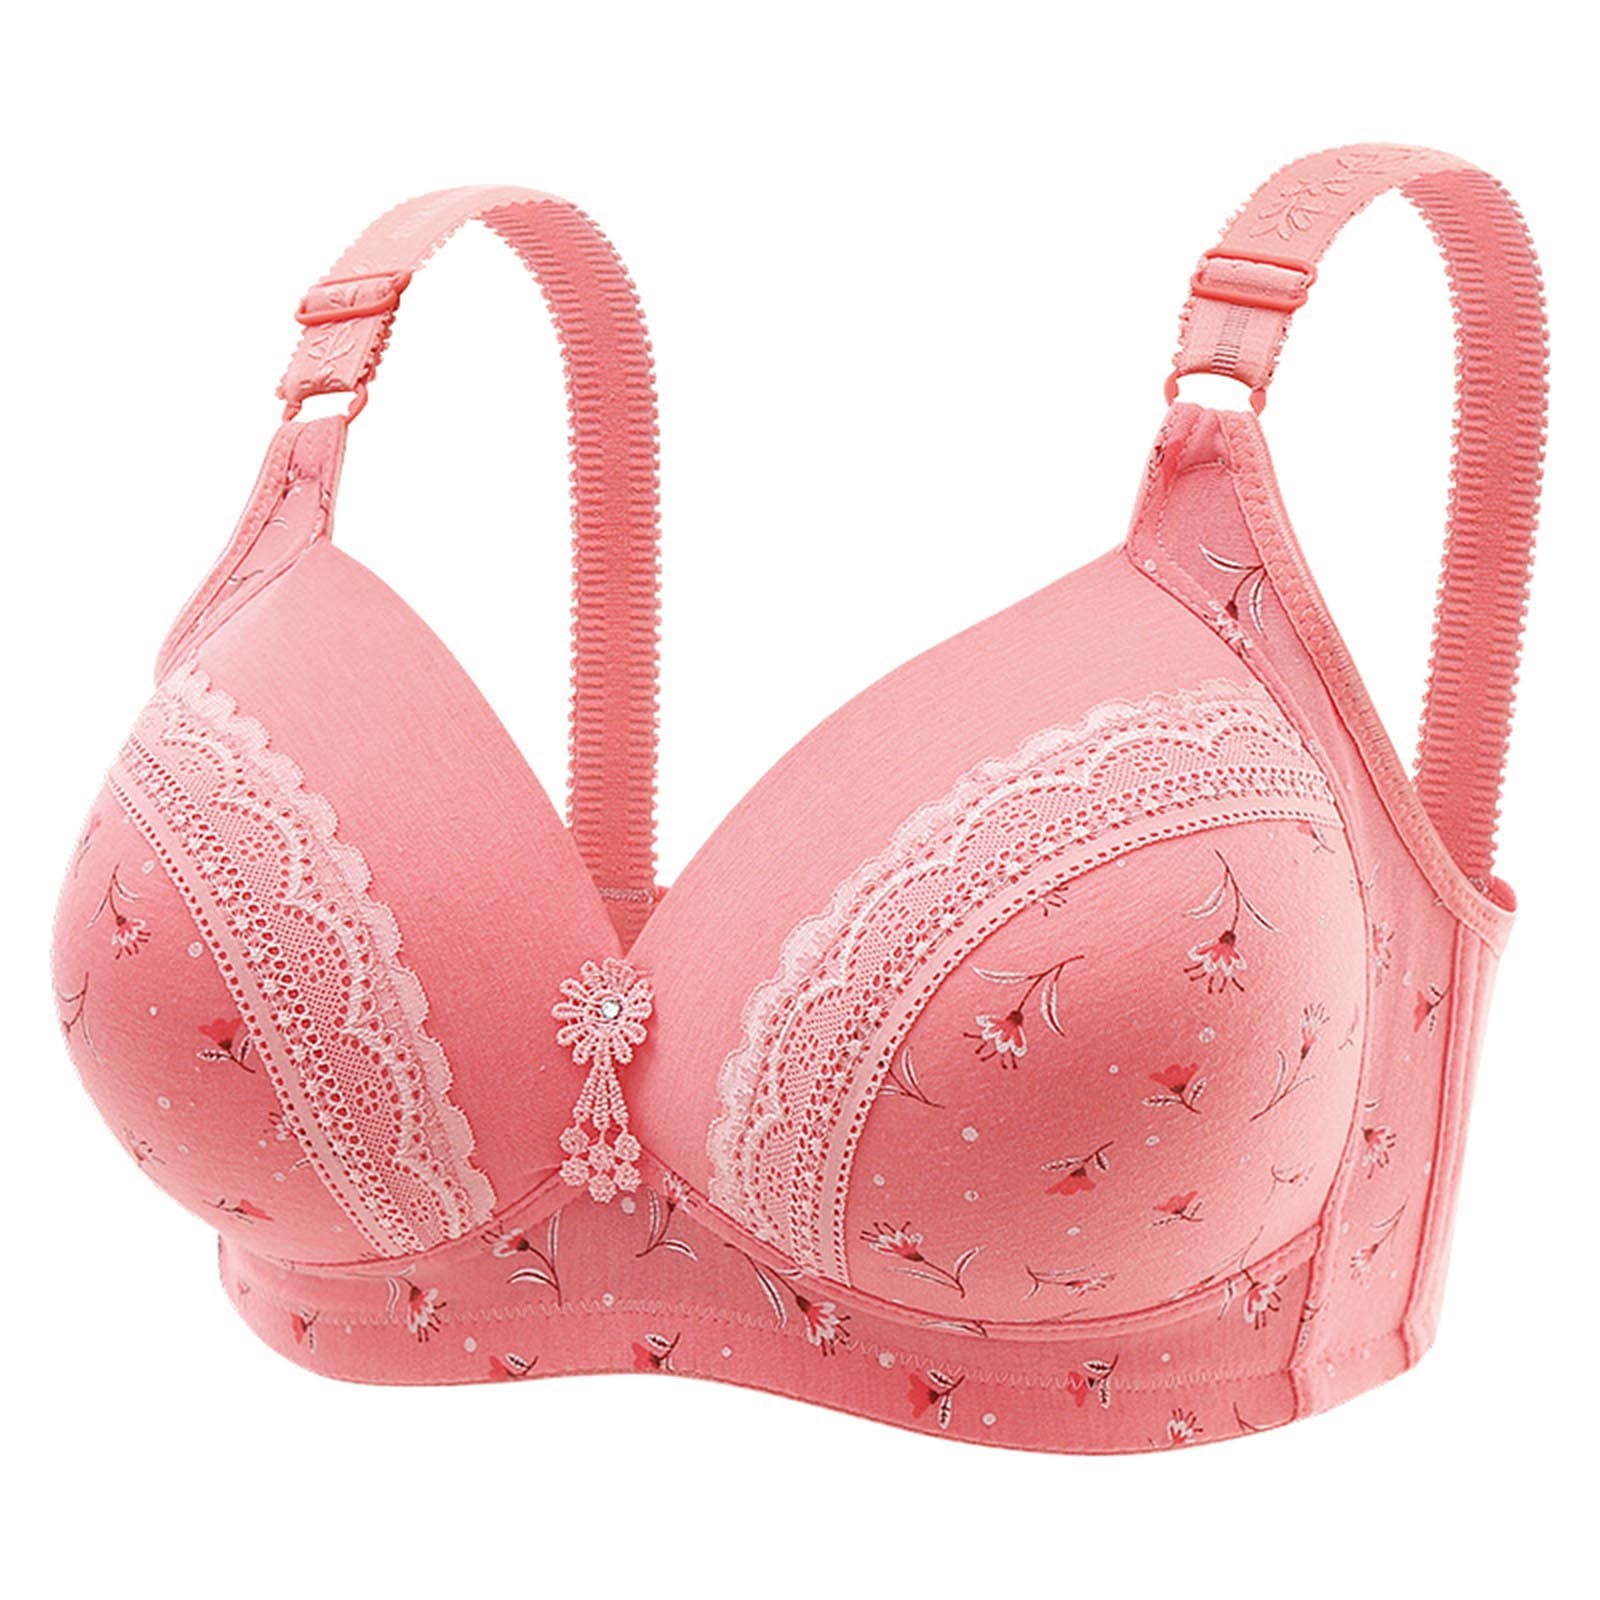 Pink Nursing Bra, Size 36/80, B cup with Lace Trim – Healthy